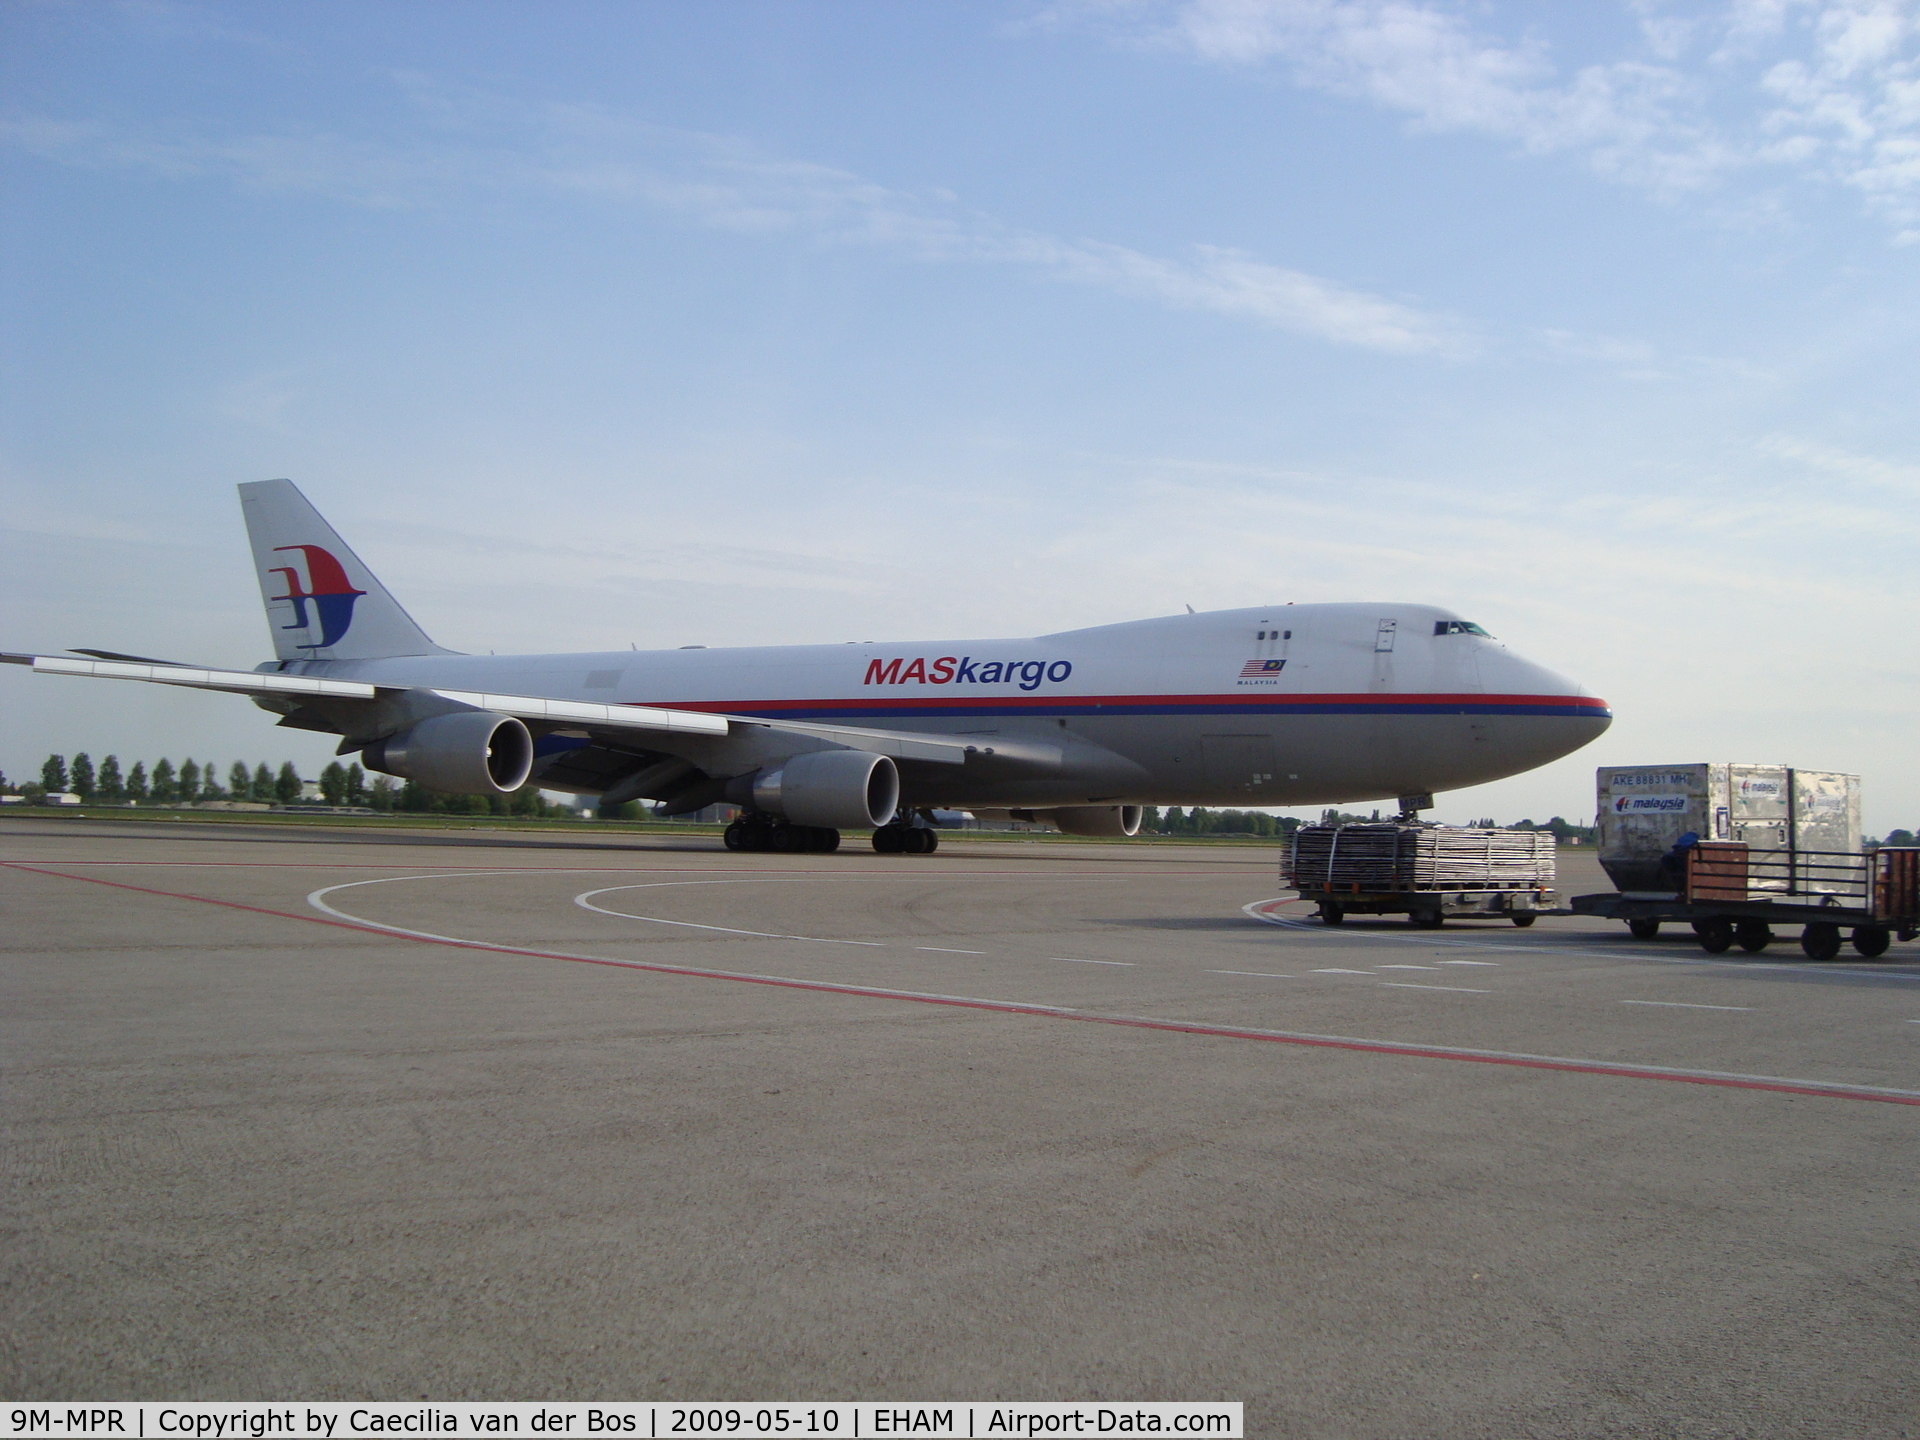 9M-MPR, 2006 Boeing 747-4H6F C/N 28434, Malaysia Airlines Cargo